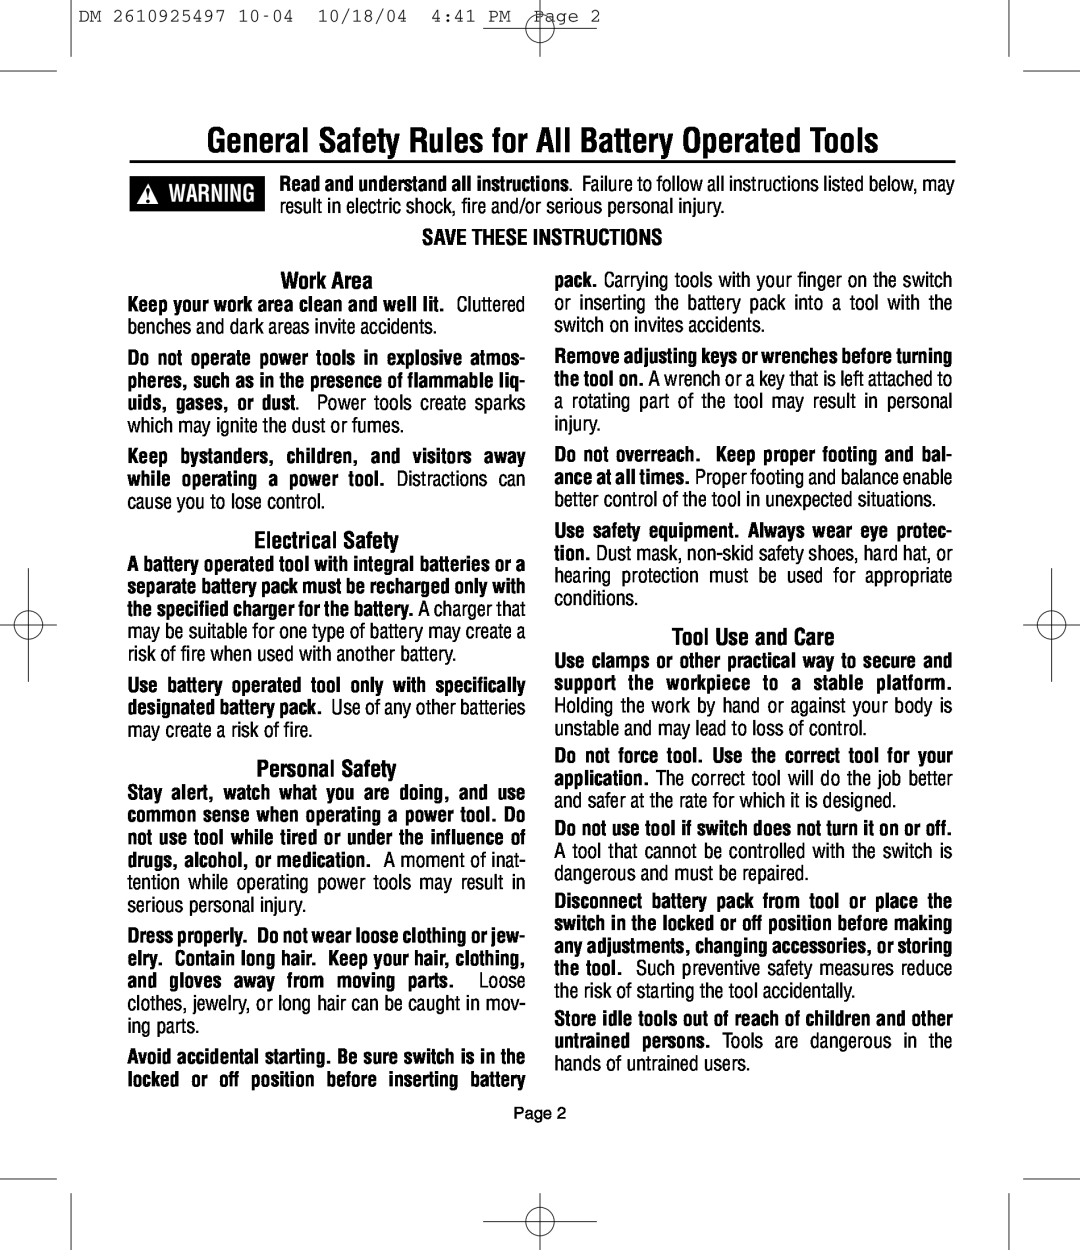 Dremel 764 owner manual General Safety Rules for All Battery Operated Tools, Work Area, Electrical Safety, Personal Safety 